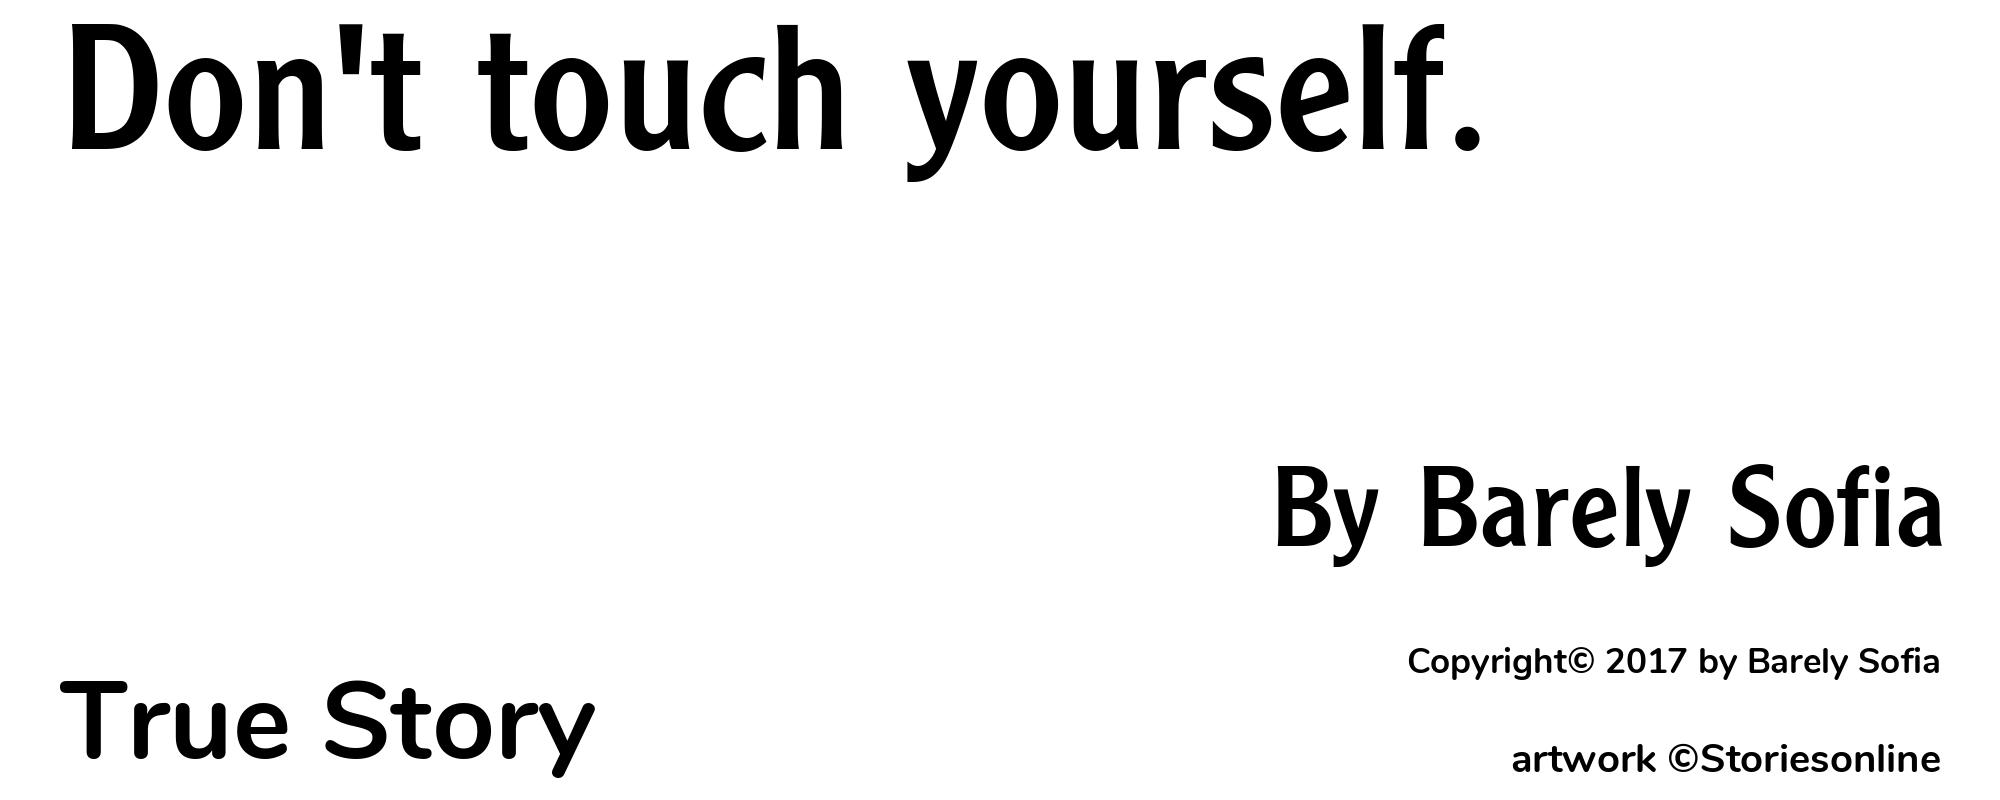 Don't touch yourself. - Cover